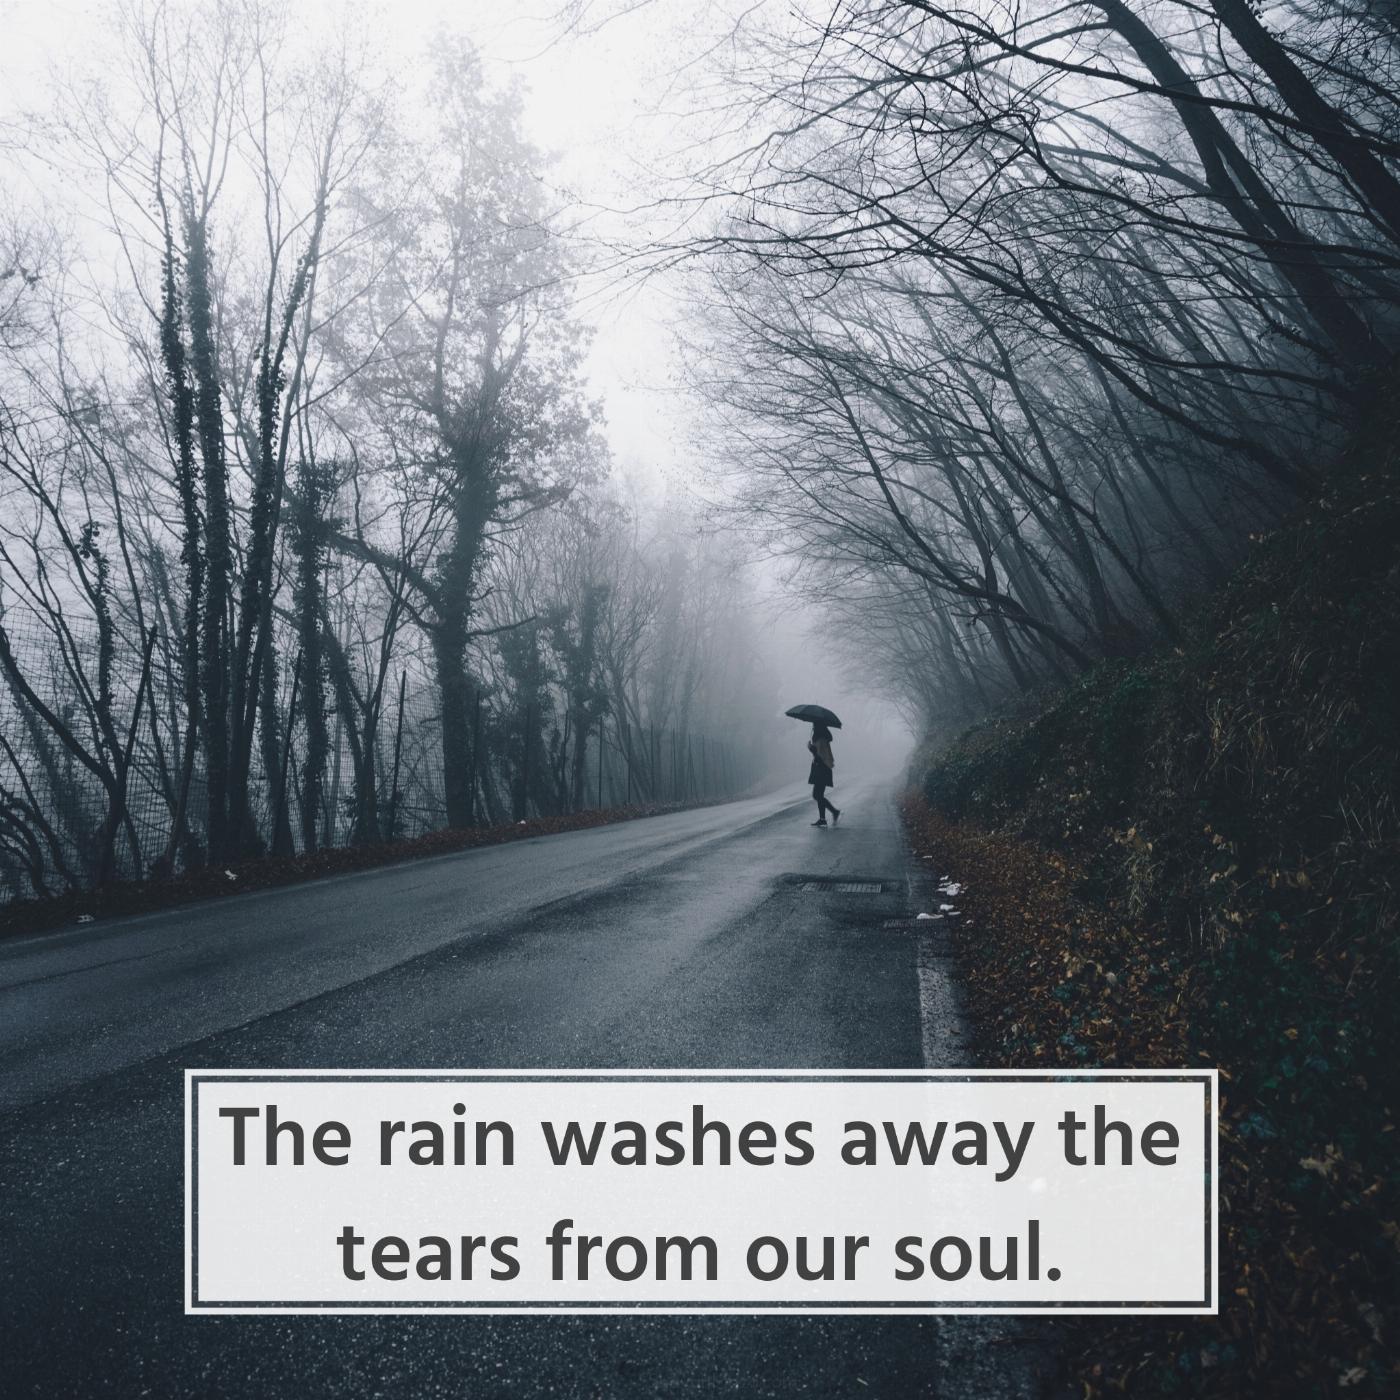 The rain washes away the tears from our soul